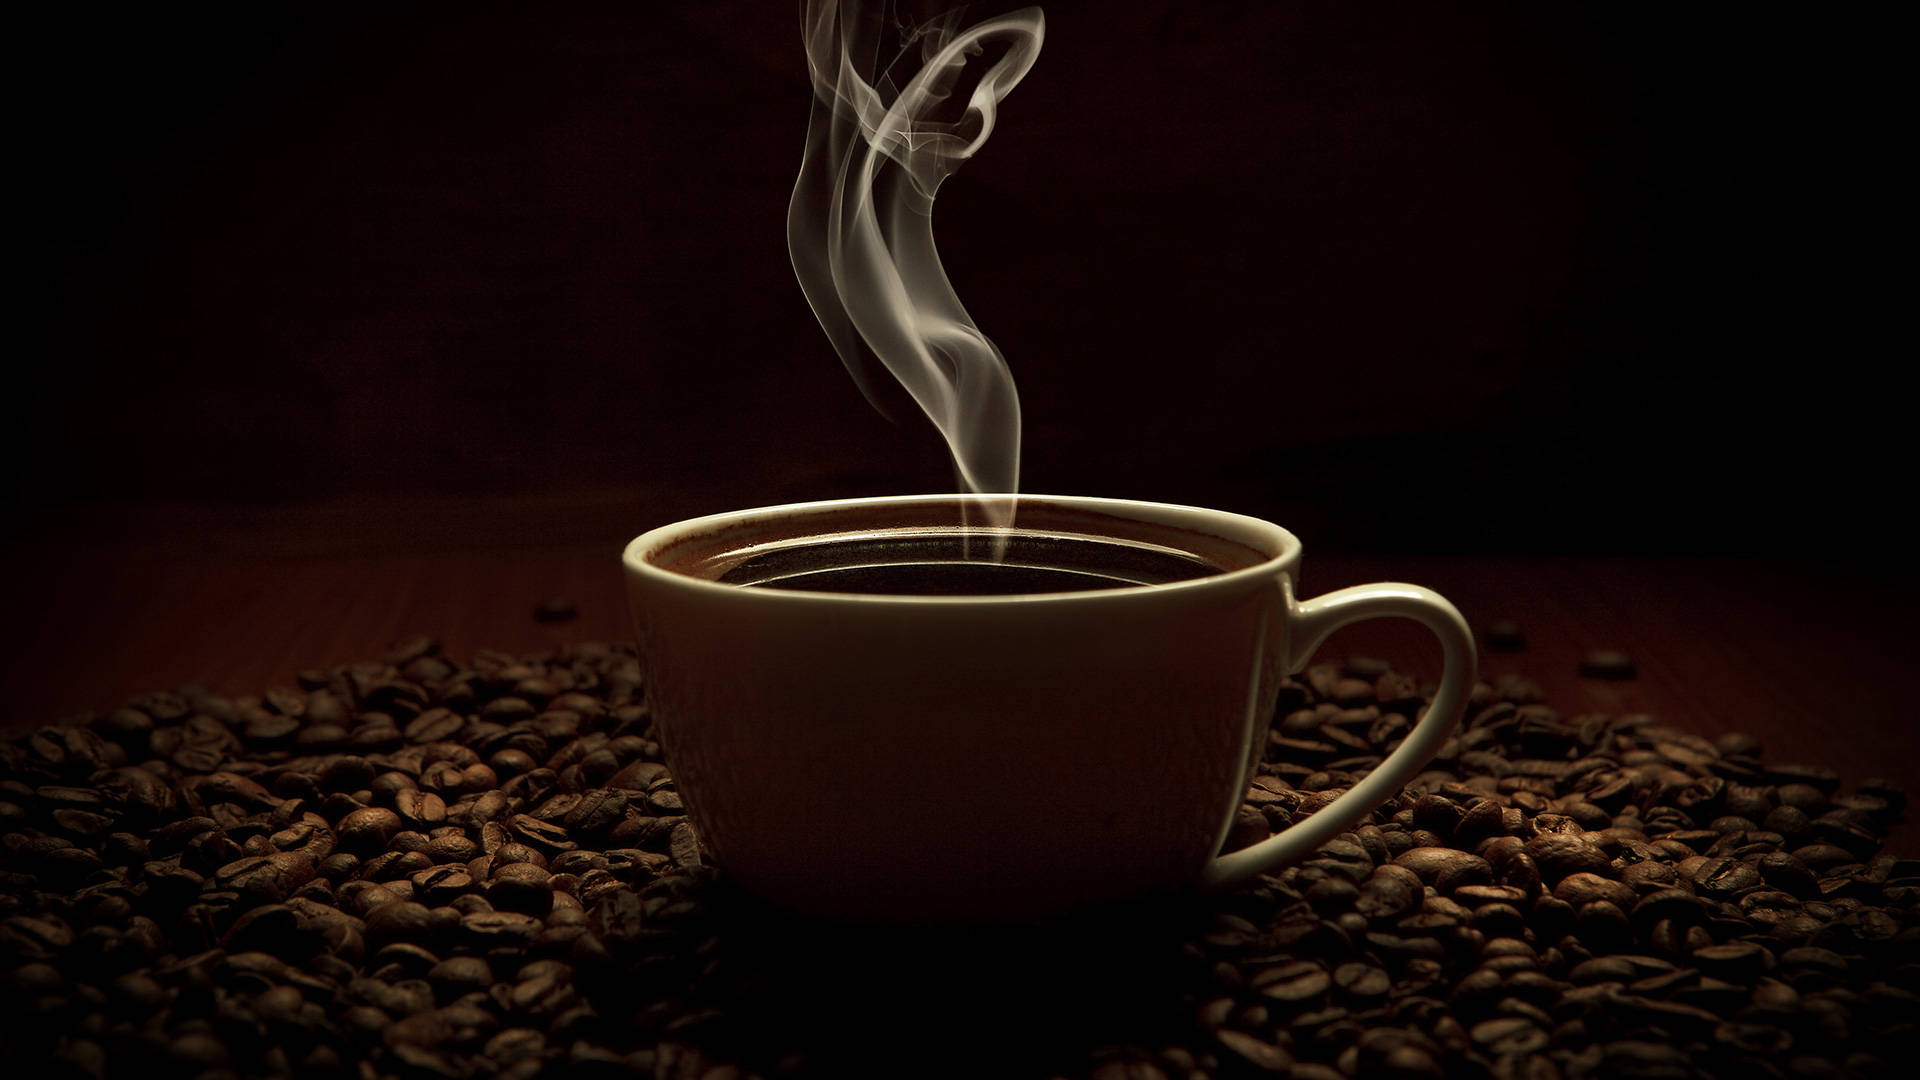 Start your day with a delicious cup of steaming hot coffee Wallpaper